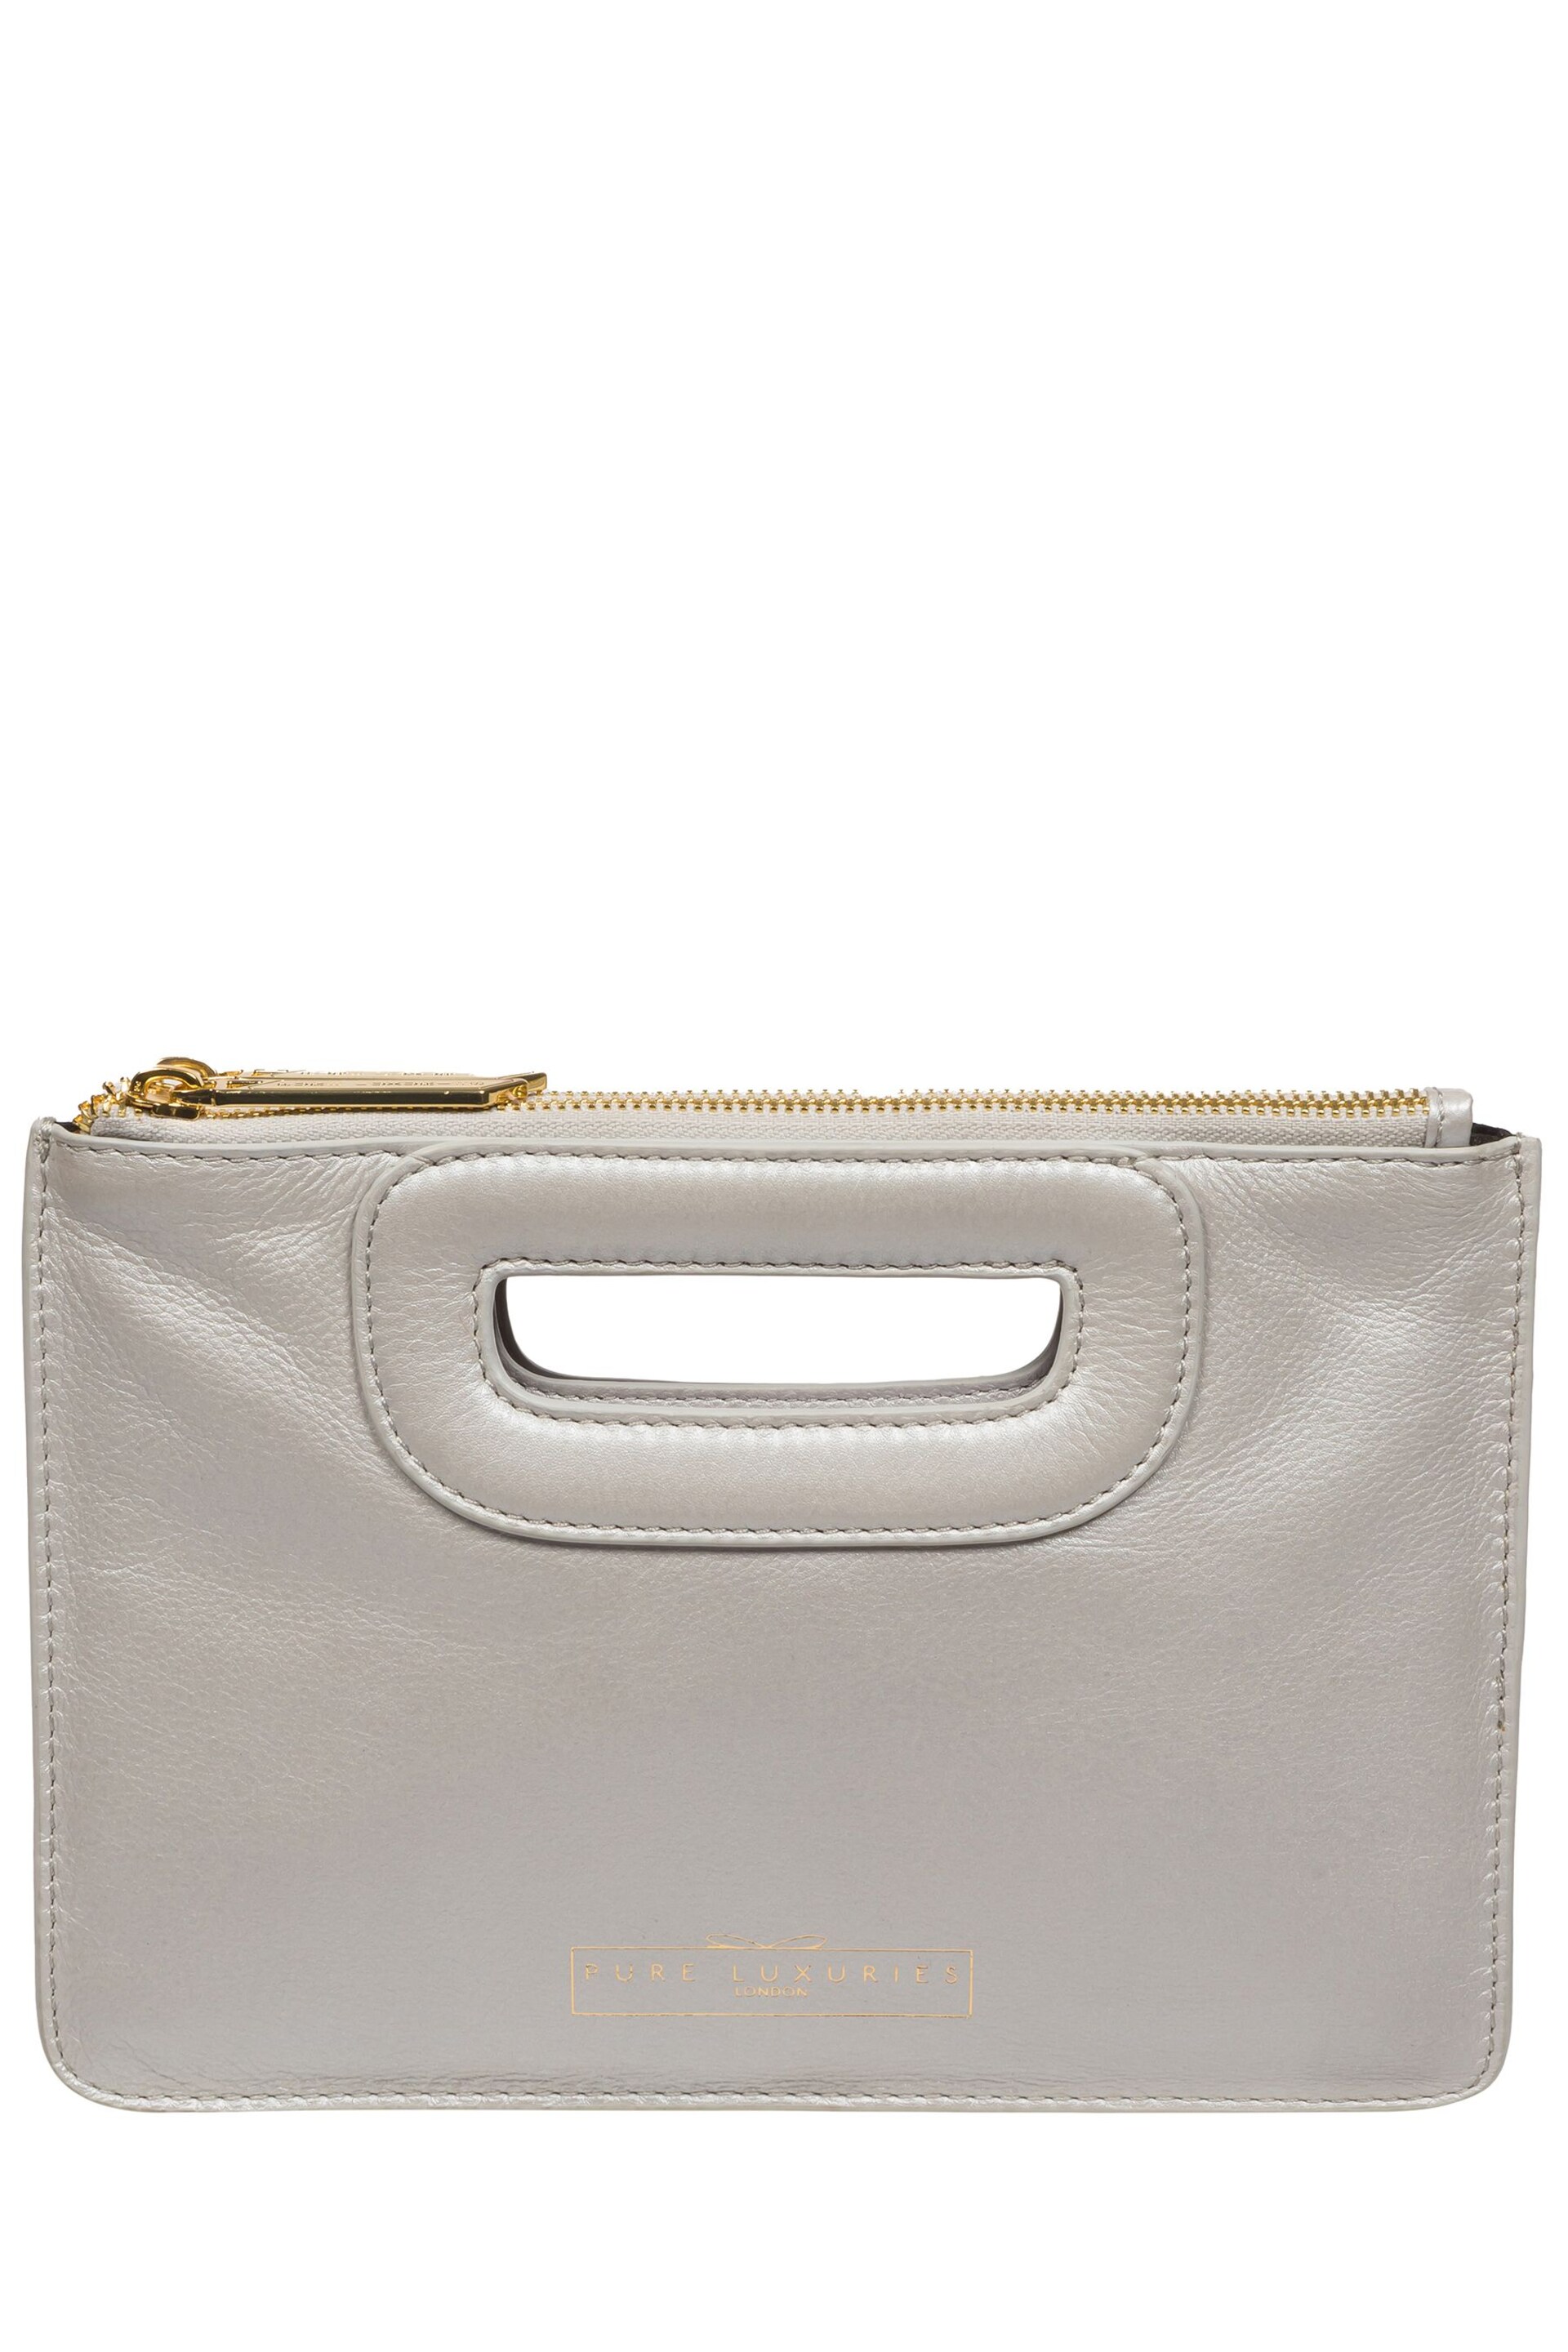 Pure Luxuries London Esher Leather Clutch Bag - Image 3 of 6